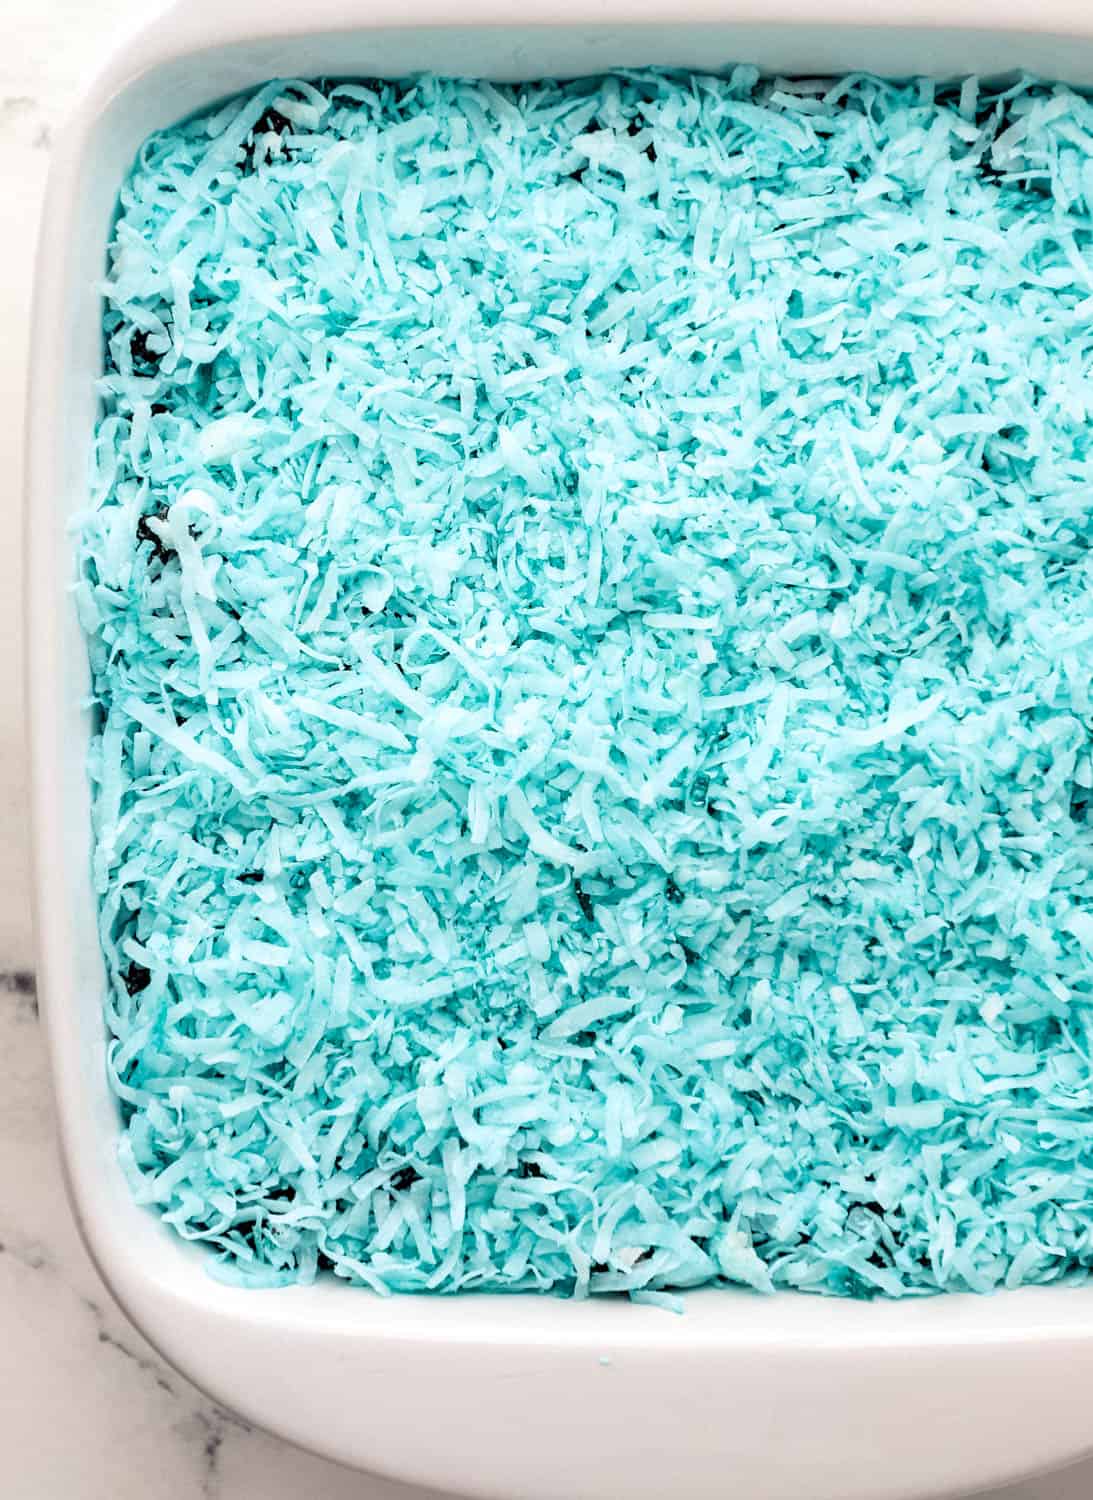 Colored shredded coconut added to the top of the crushed cookies in the white baking dish. 